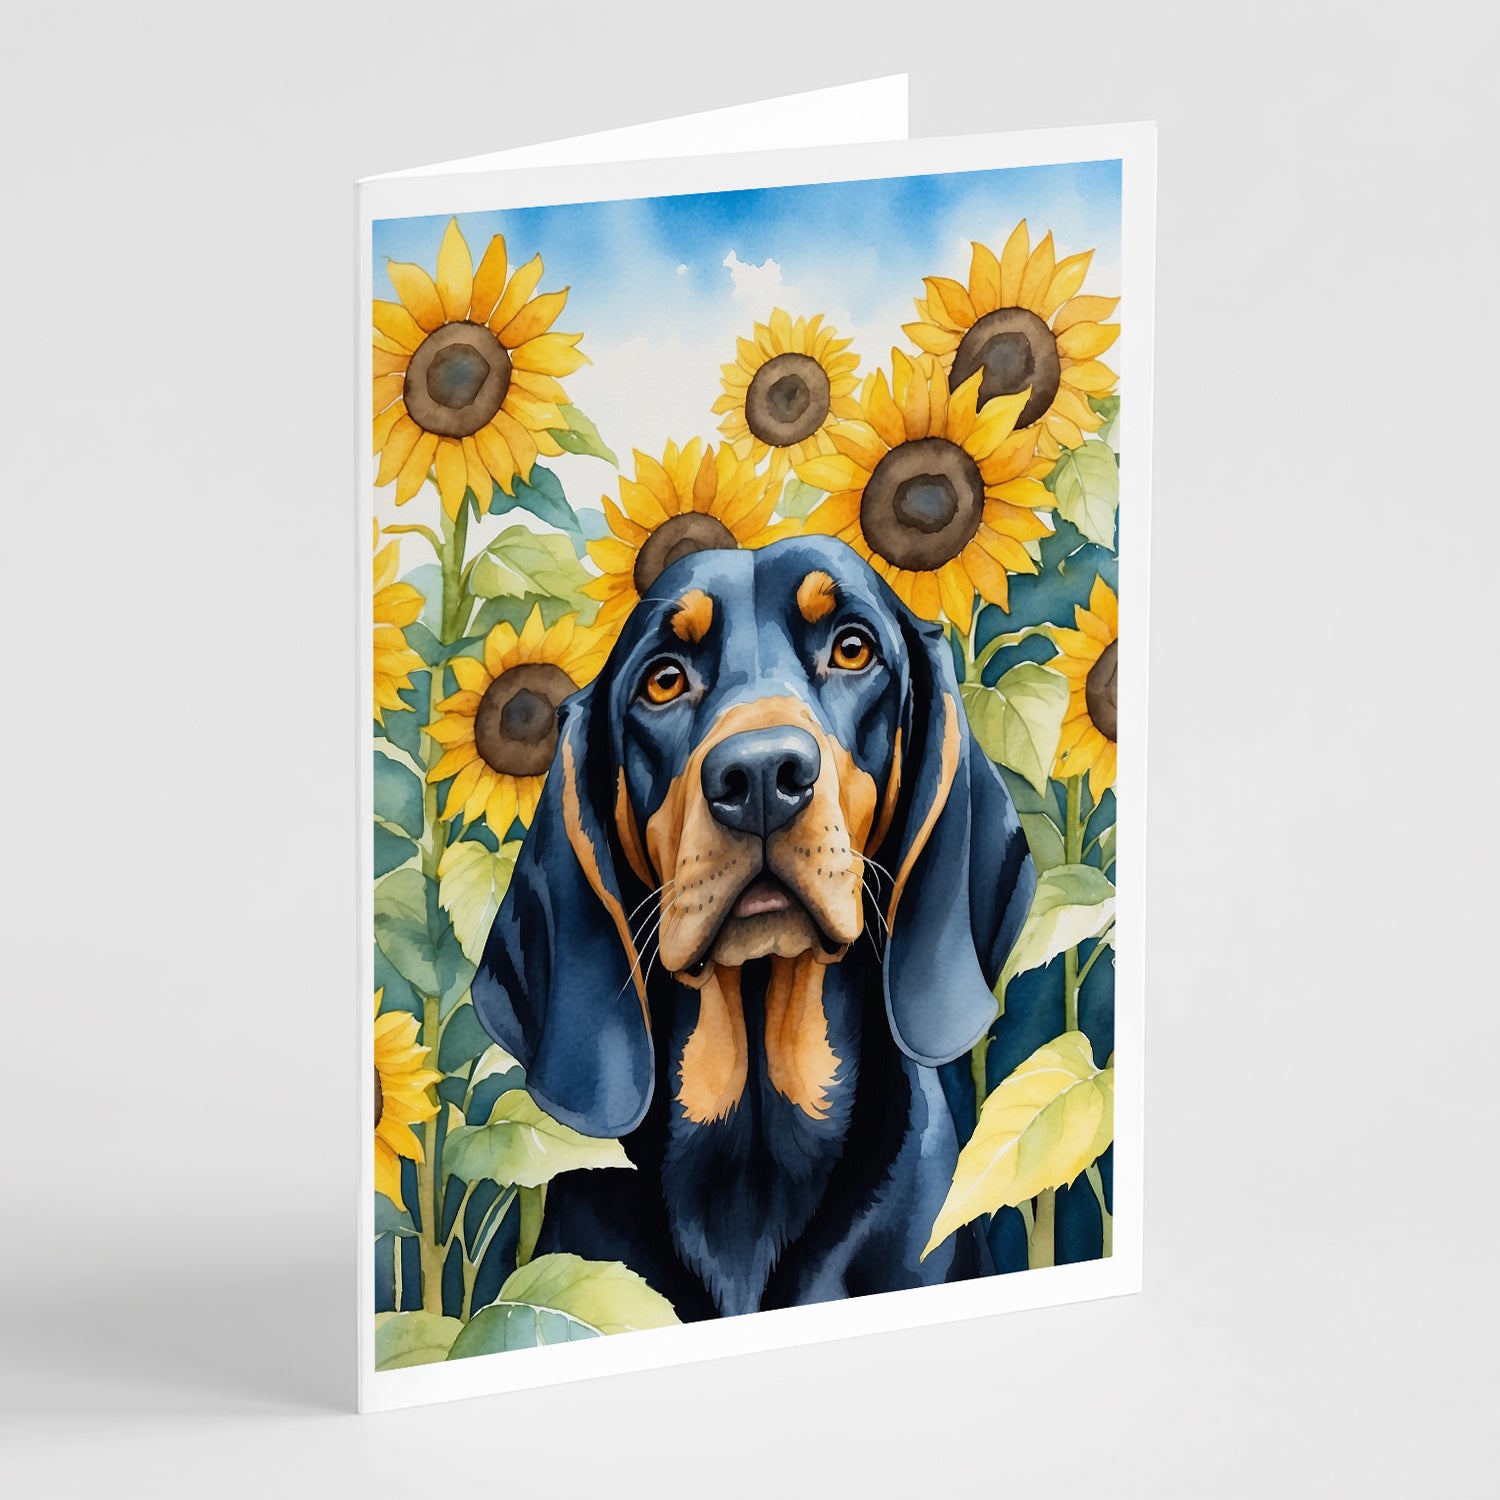 Buy this Black and Tan Coonhound in Sunflowers Greeting Cards Pack of 8